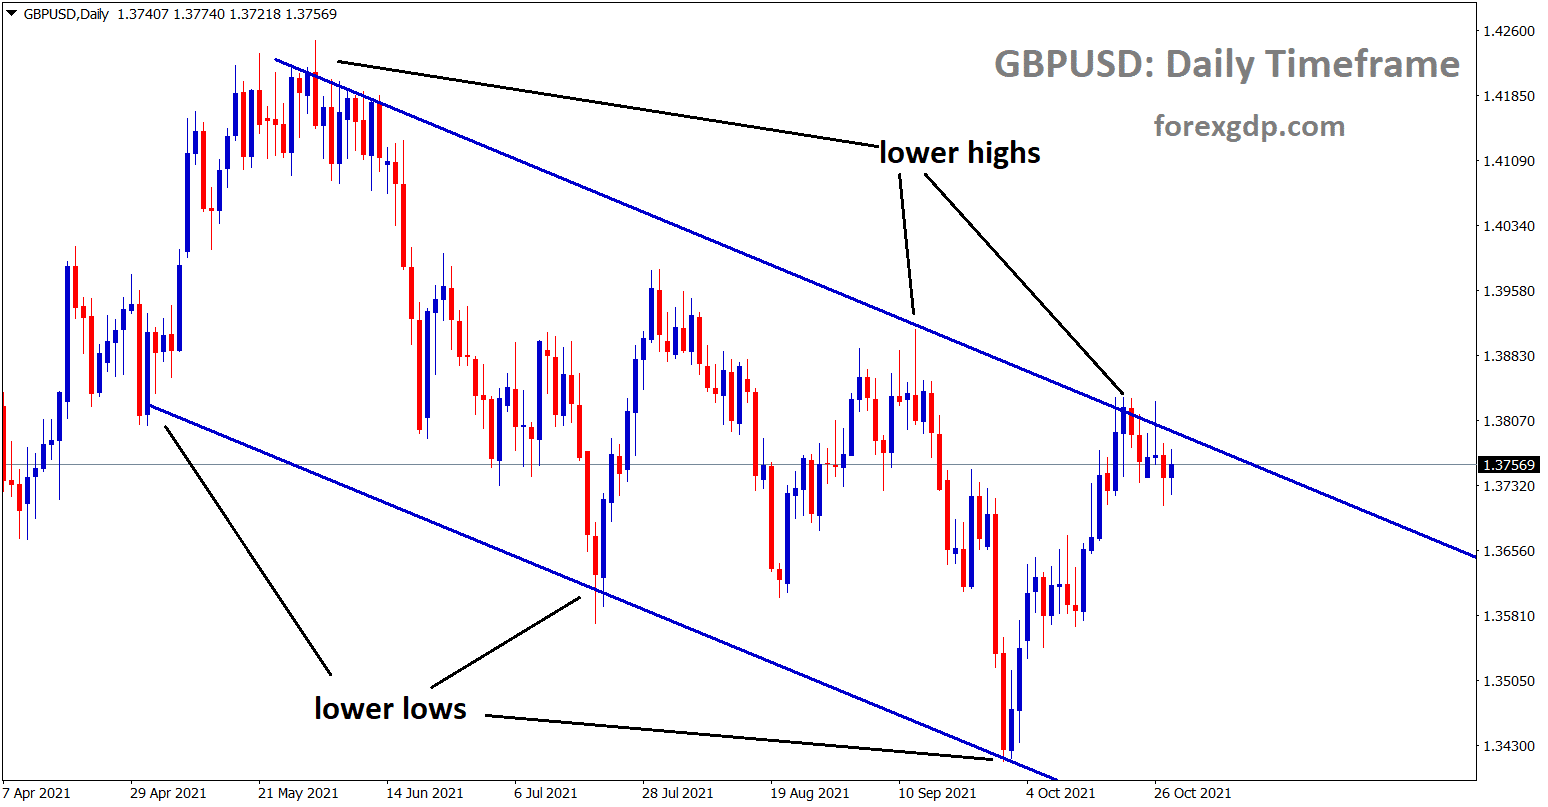 GBPUSD is moving in a descending channel market is standing at the lower high area of the channel.